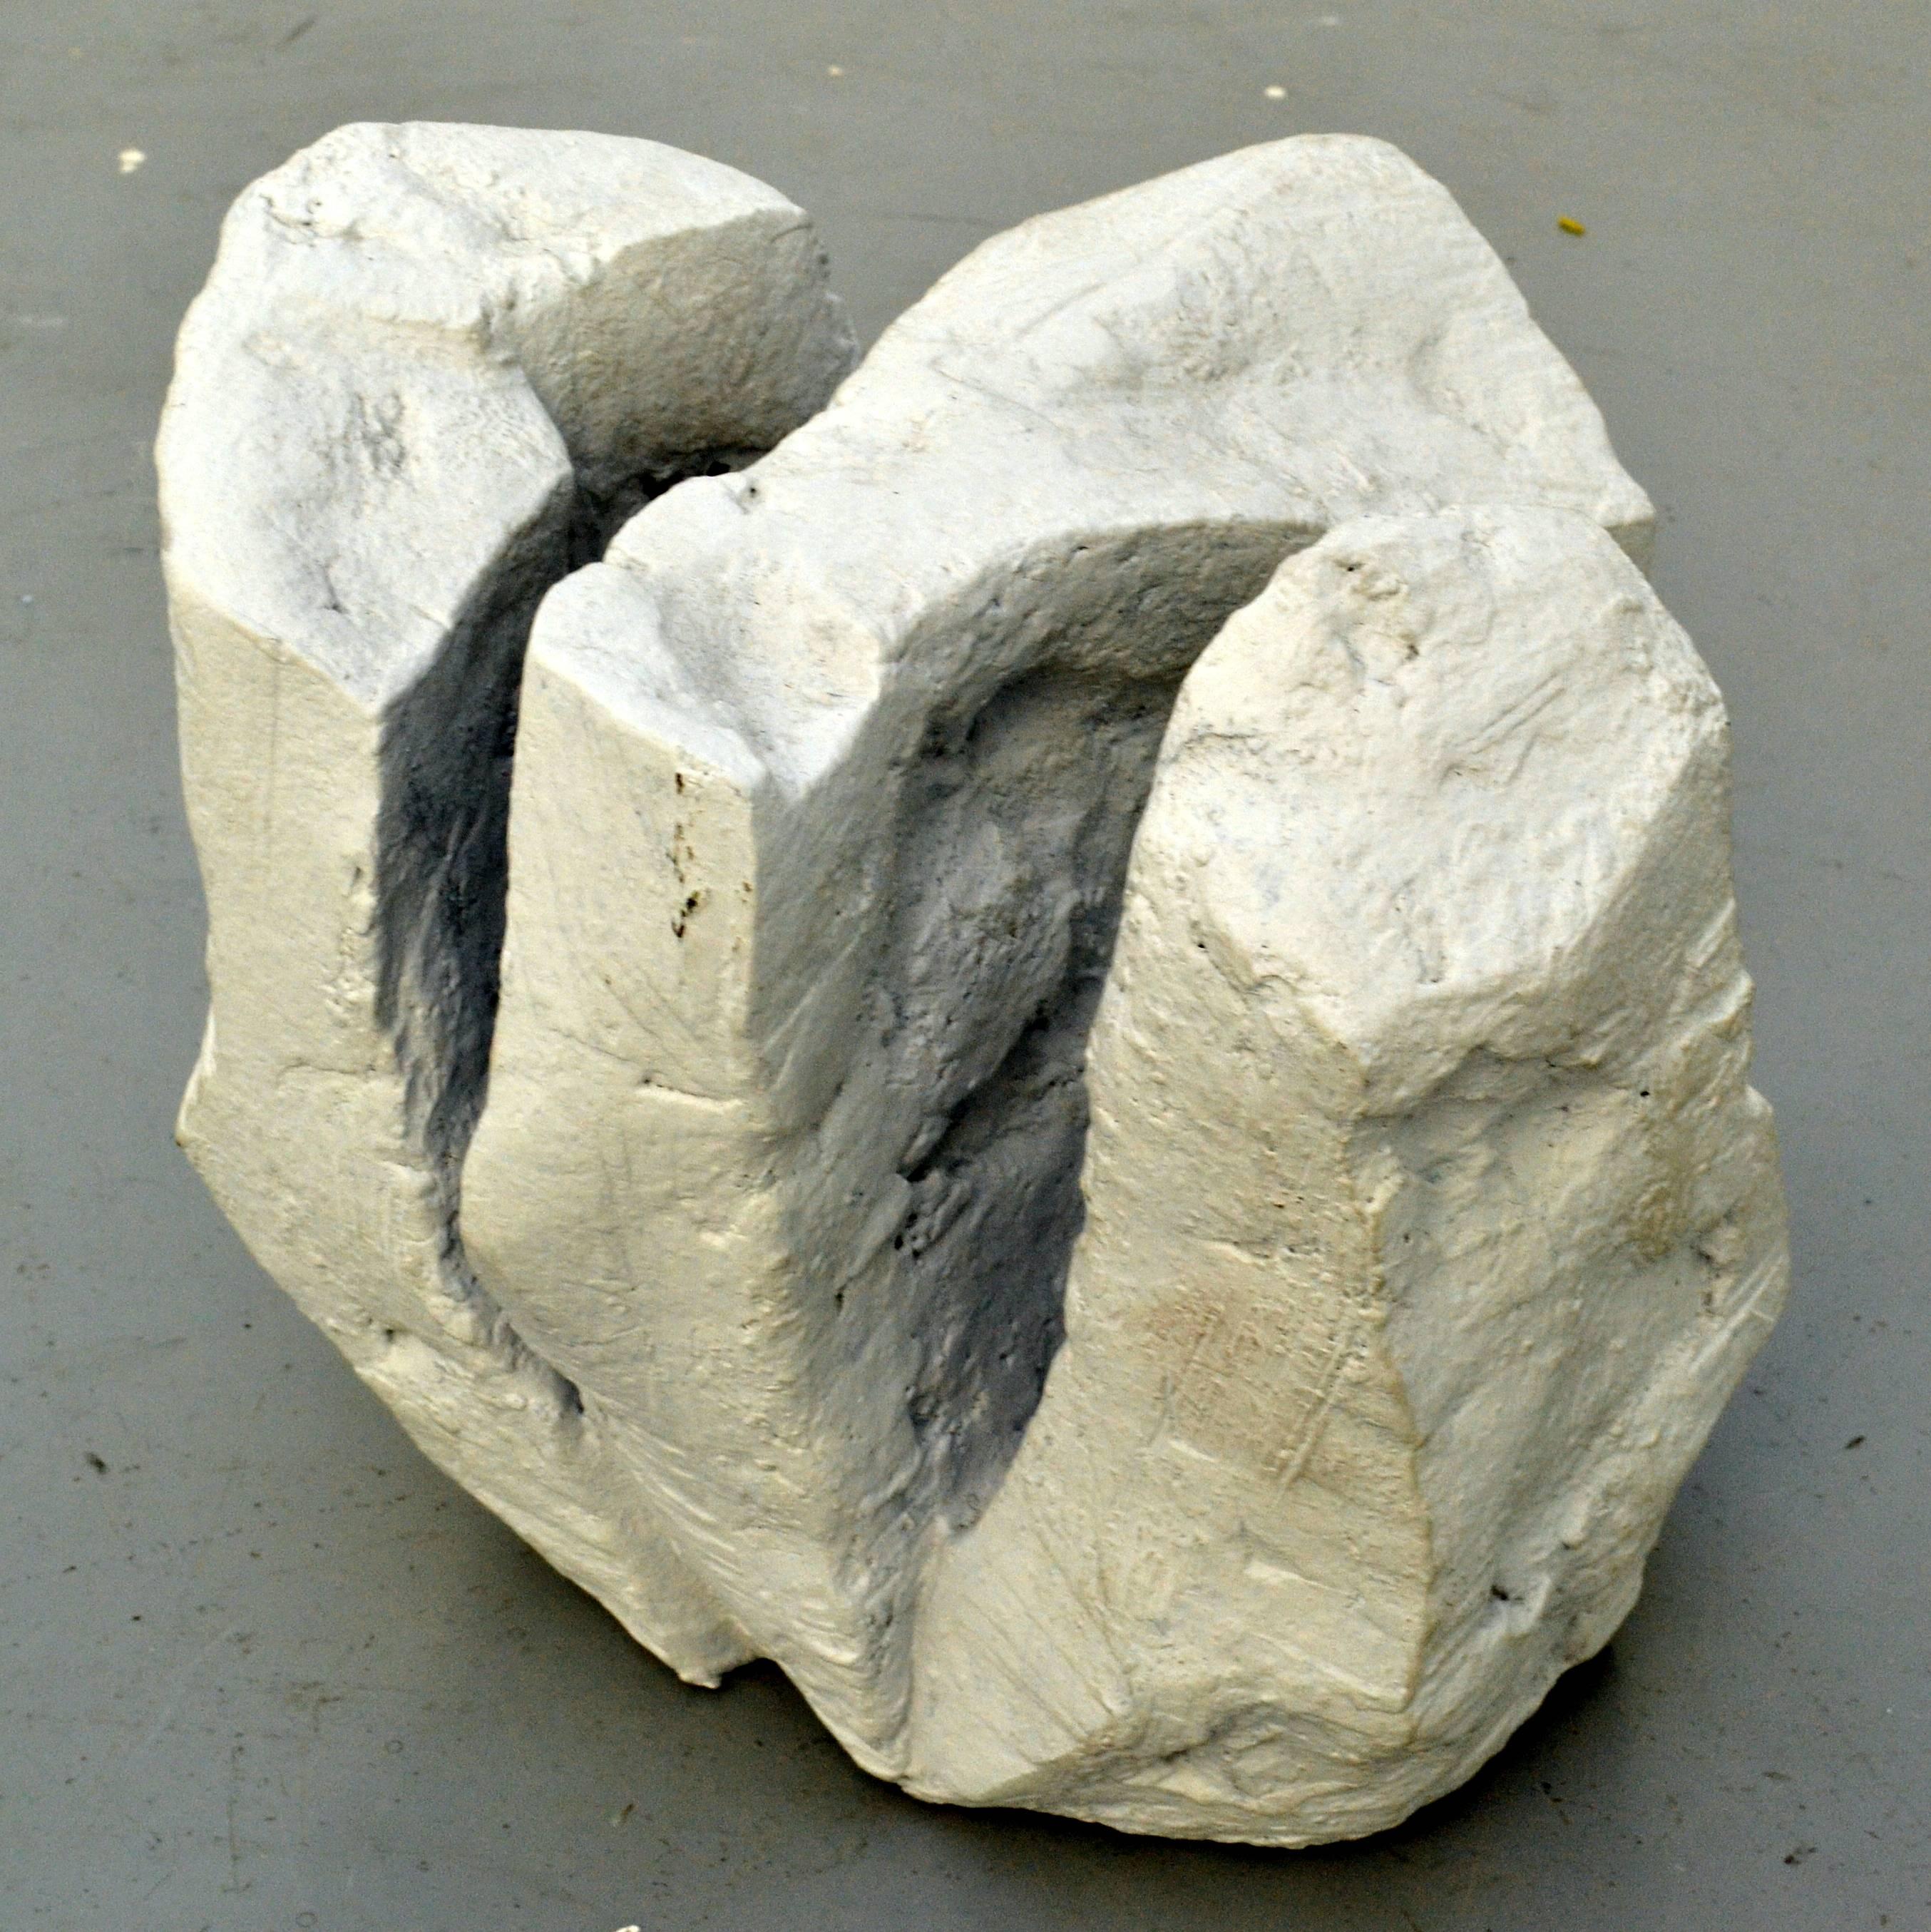 This hand formed ceramic sculpture looks like white cliffs on the British coast line. His work echoes a voyage of discovery in not just the visible natural world of trees, rocks but the city and Industrial landscape with his exploration of space and